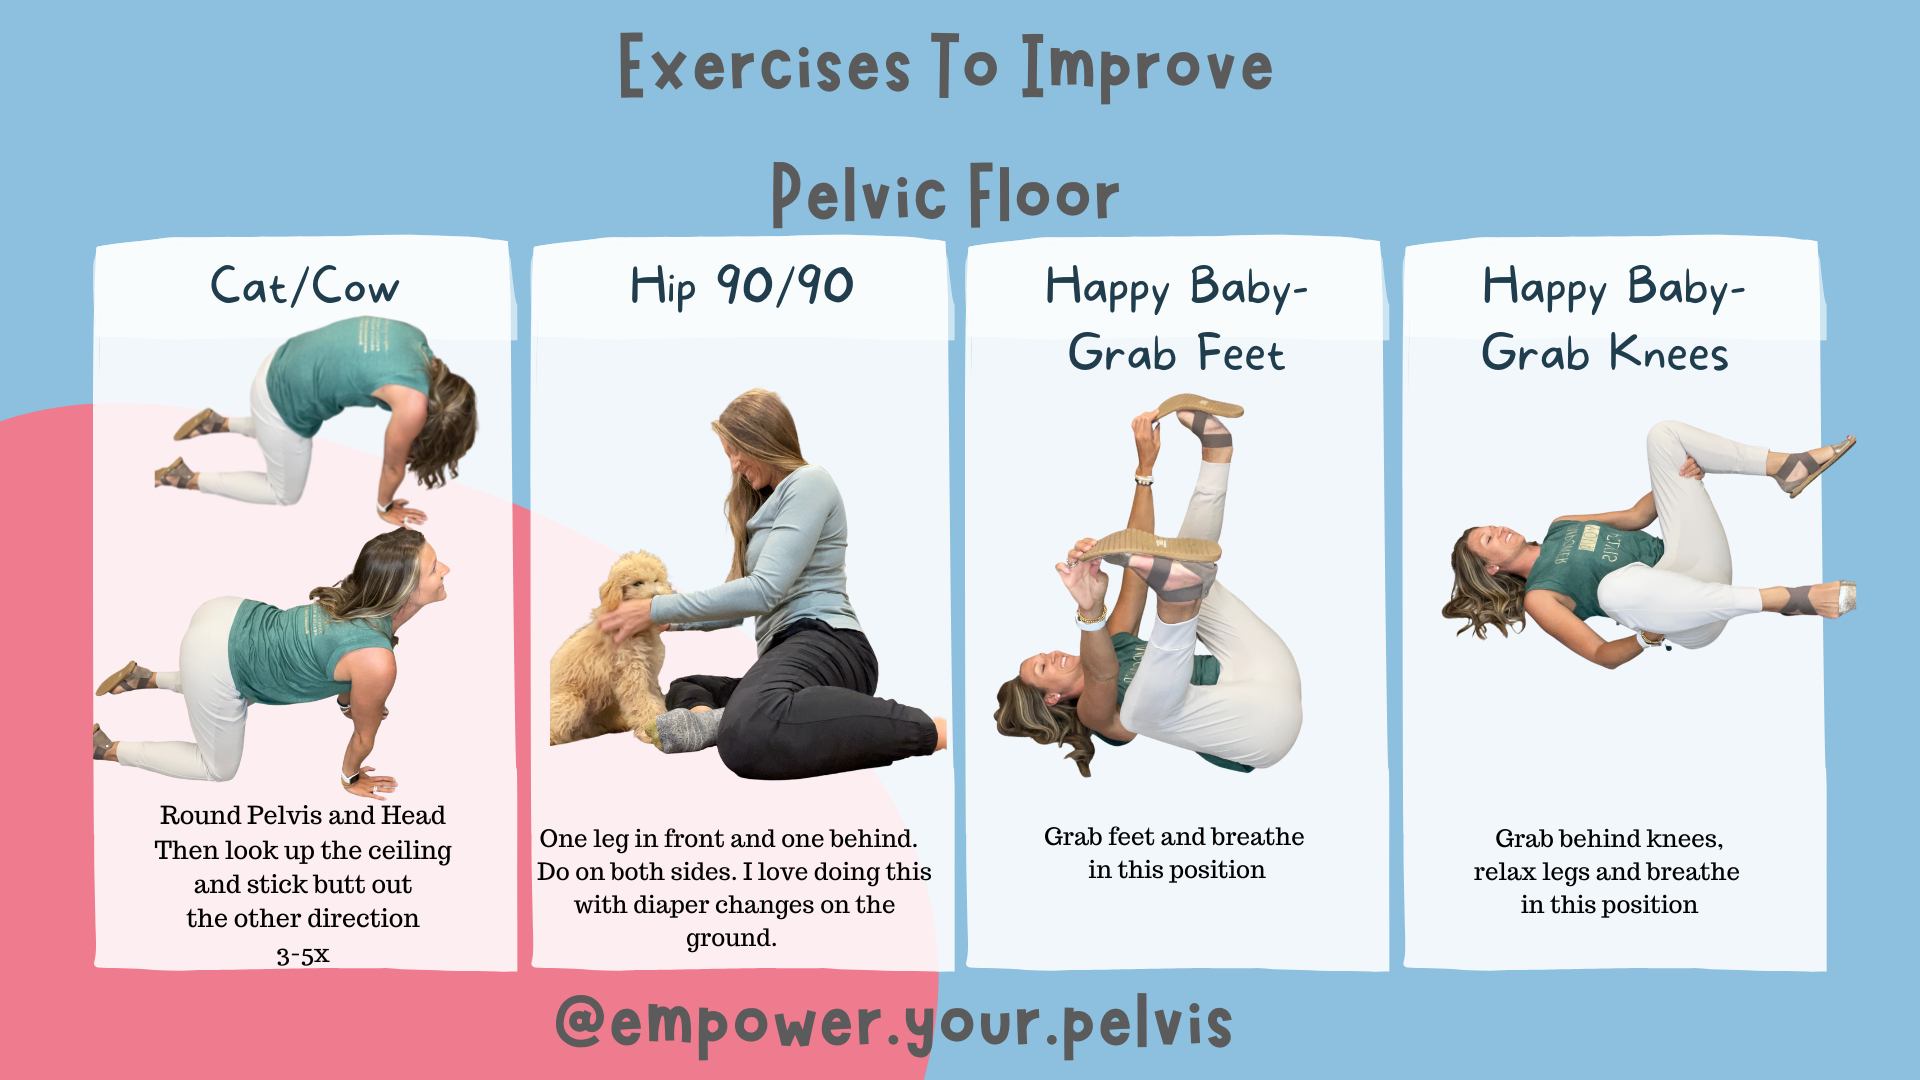 Best Exercises During Pregnancy For Each Trimester  Blog by CB  Physiotherapy, Active Healing for Pain Free Life.